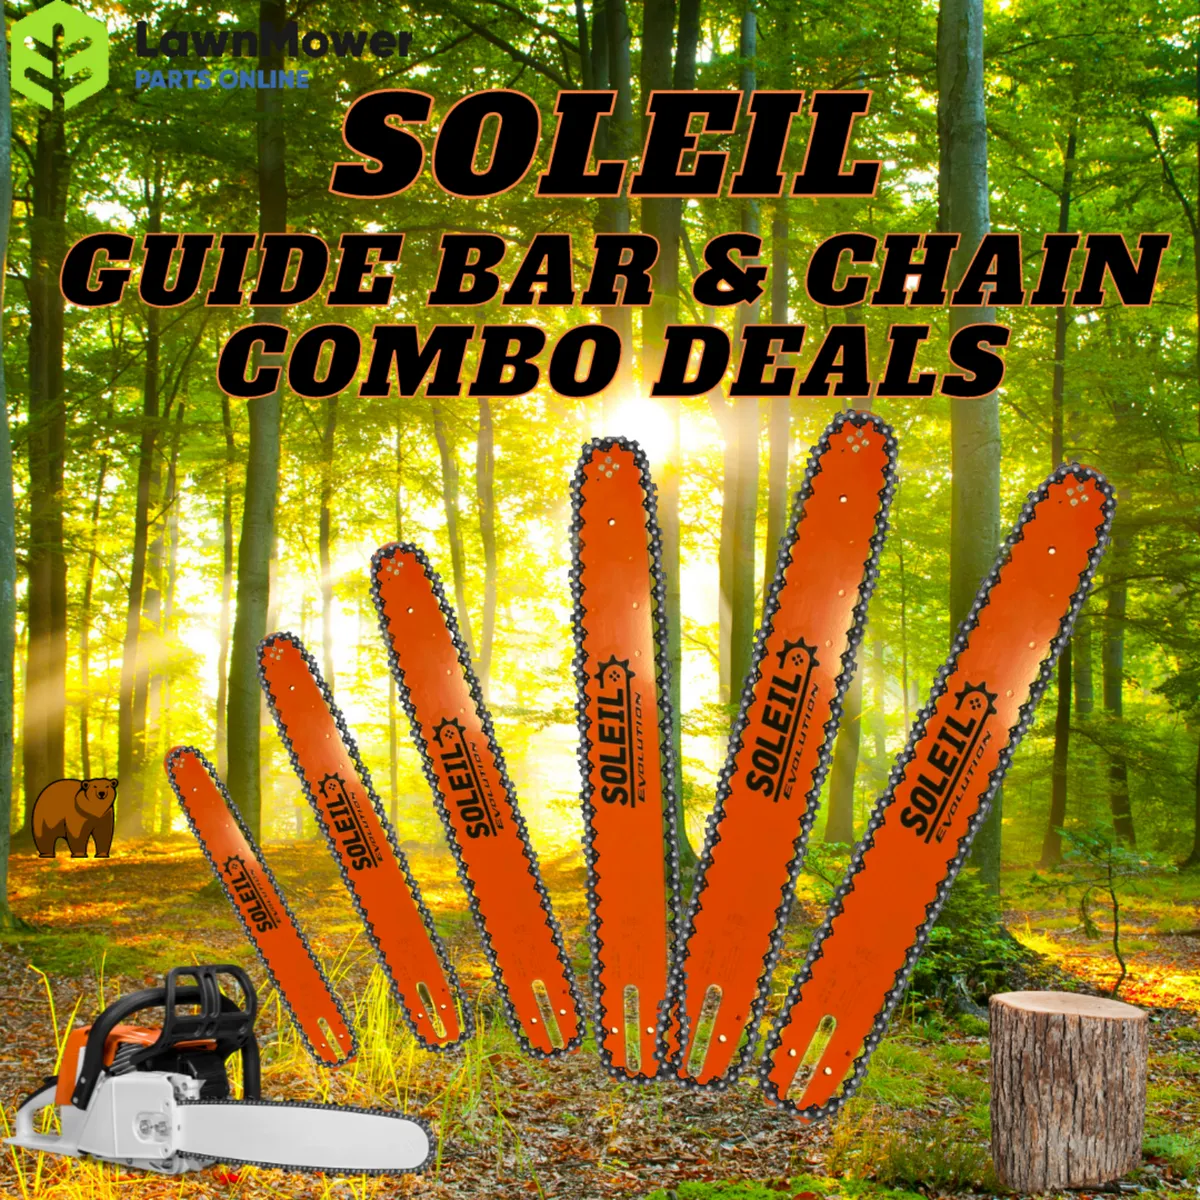 Bar & Chain Combo Deals: FREE DELIVERY